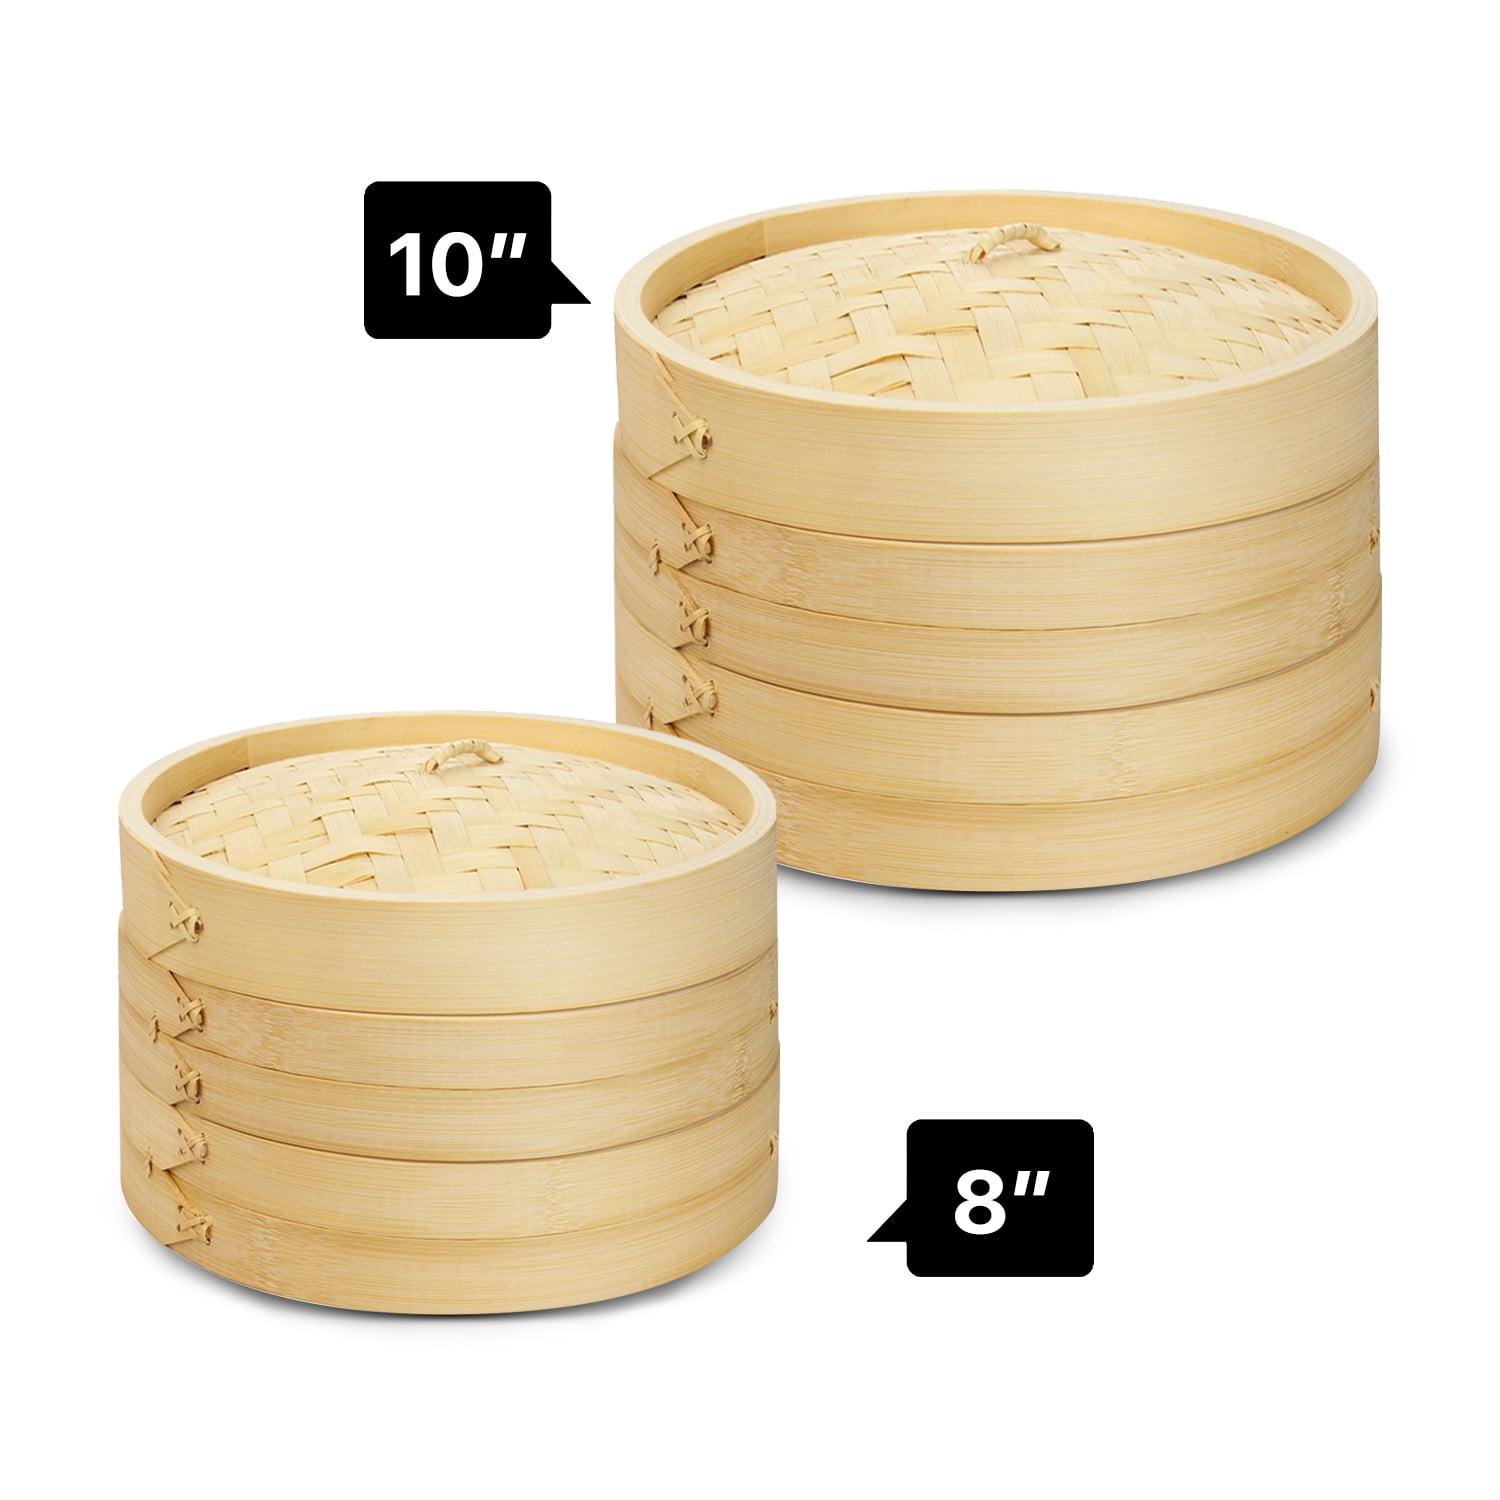 2x Chopstick Pair and Silicon Brush Pandas Kitchen 10-inch Bamboo Steamer for Cooking 2-Tier with 50 Wax Paper Liners 1 sauce Dish Natural Bamboo Dumpling Steamer Basket With Ebook 